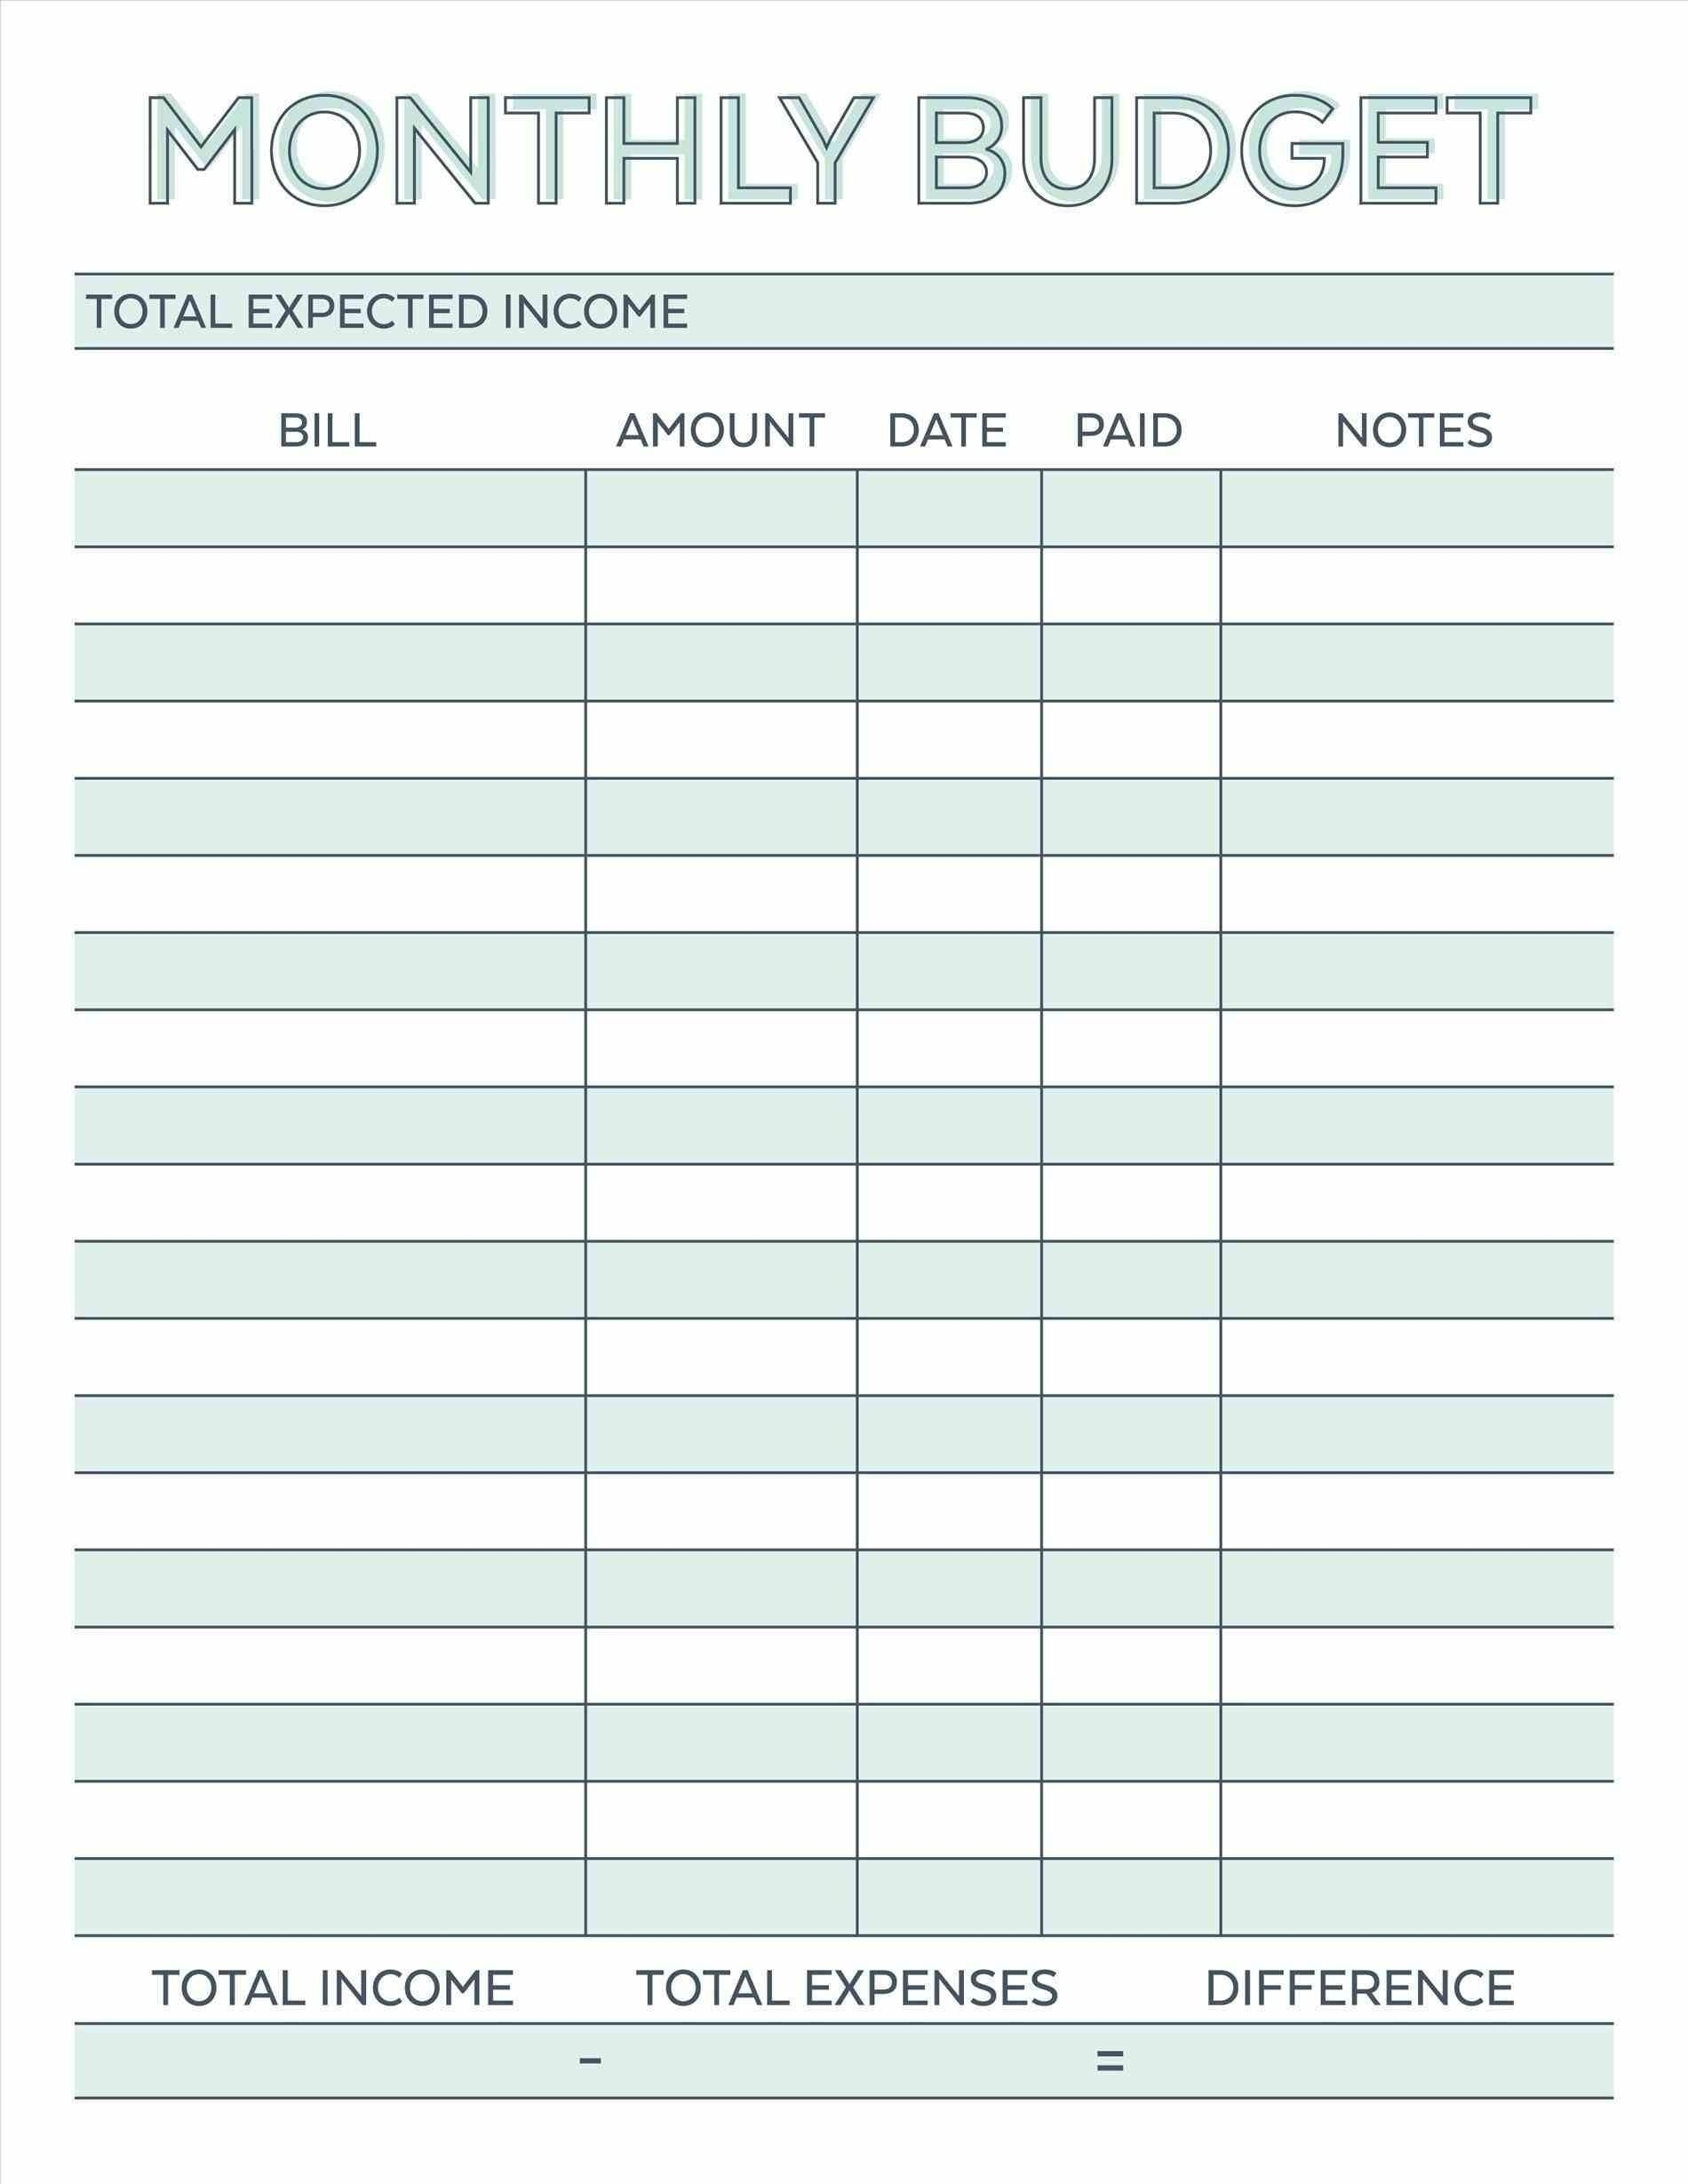 Catch Monthly Bill Payment Worksheet